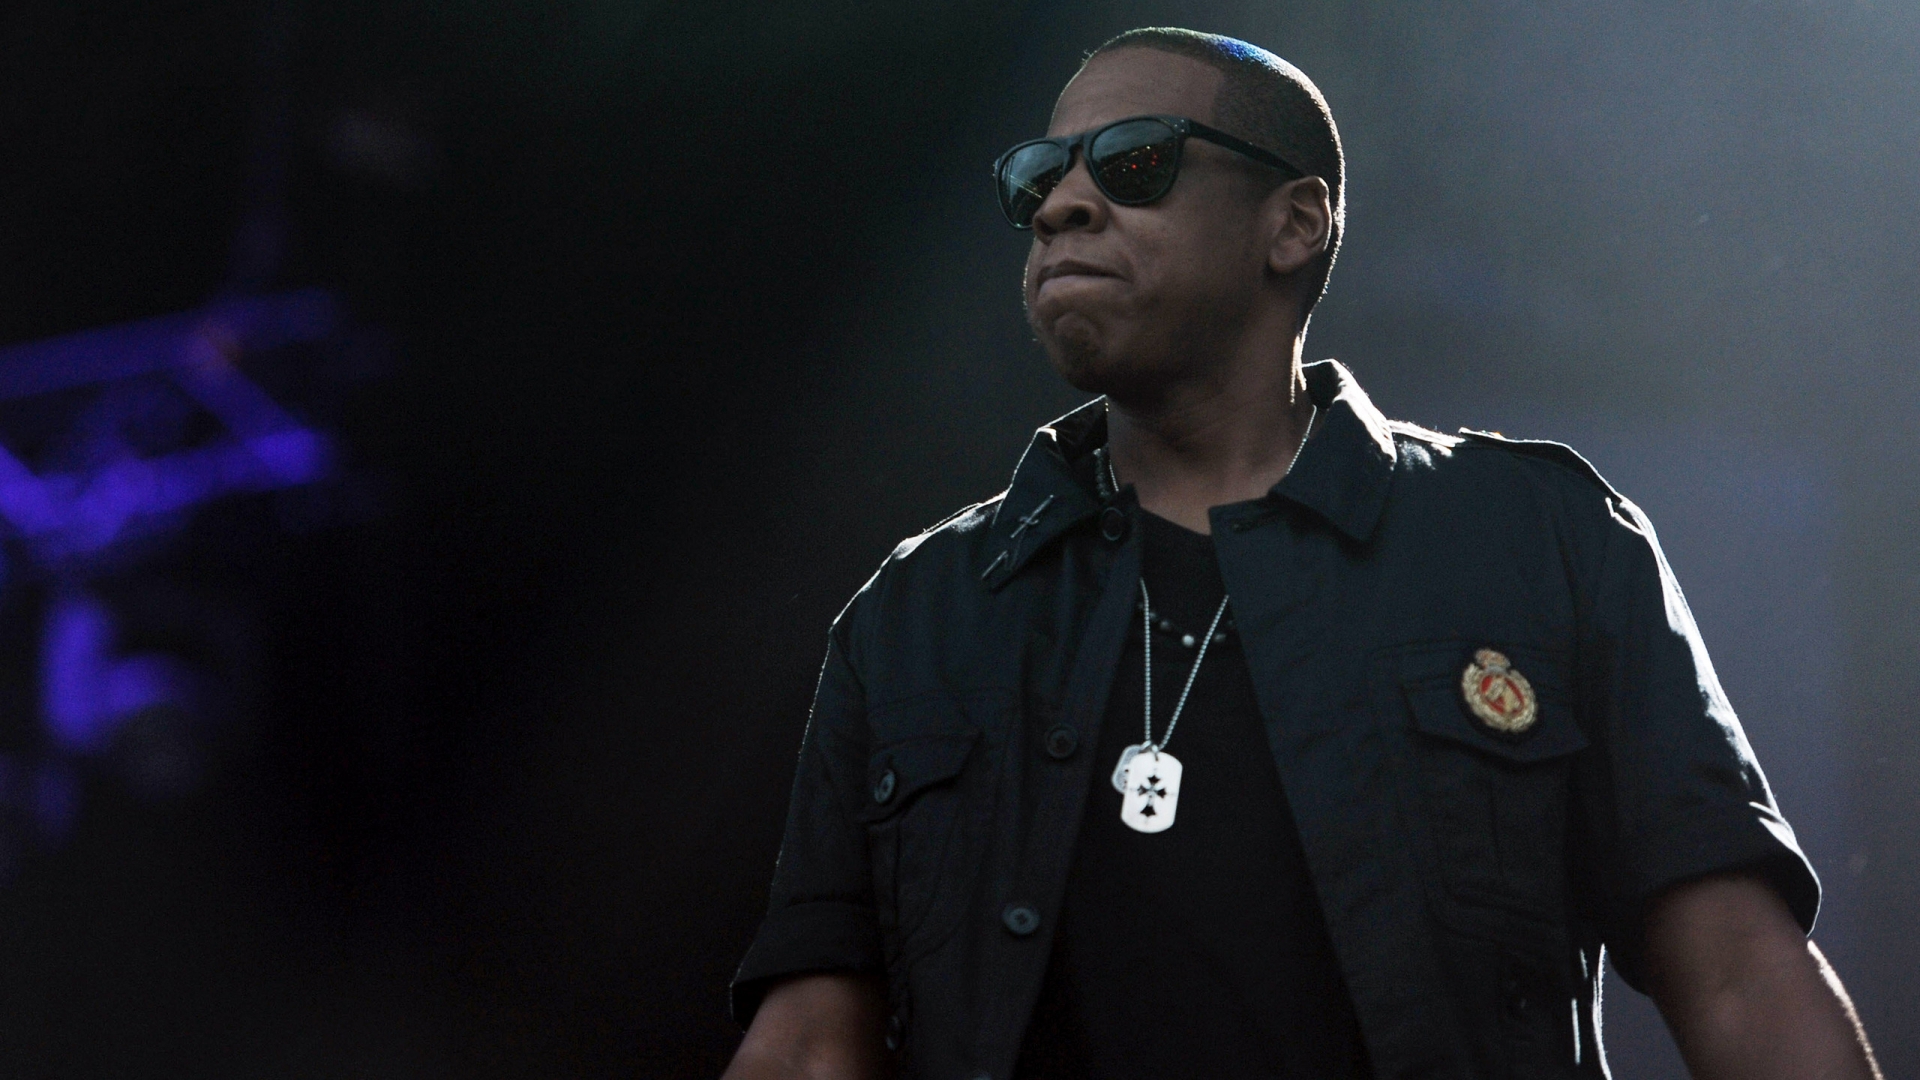 Cool Jay Z for 1920 x 1080 HDTV 1080p resolution